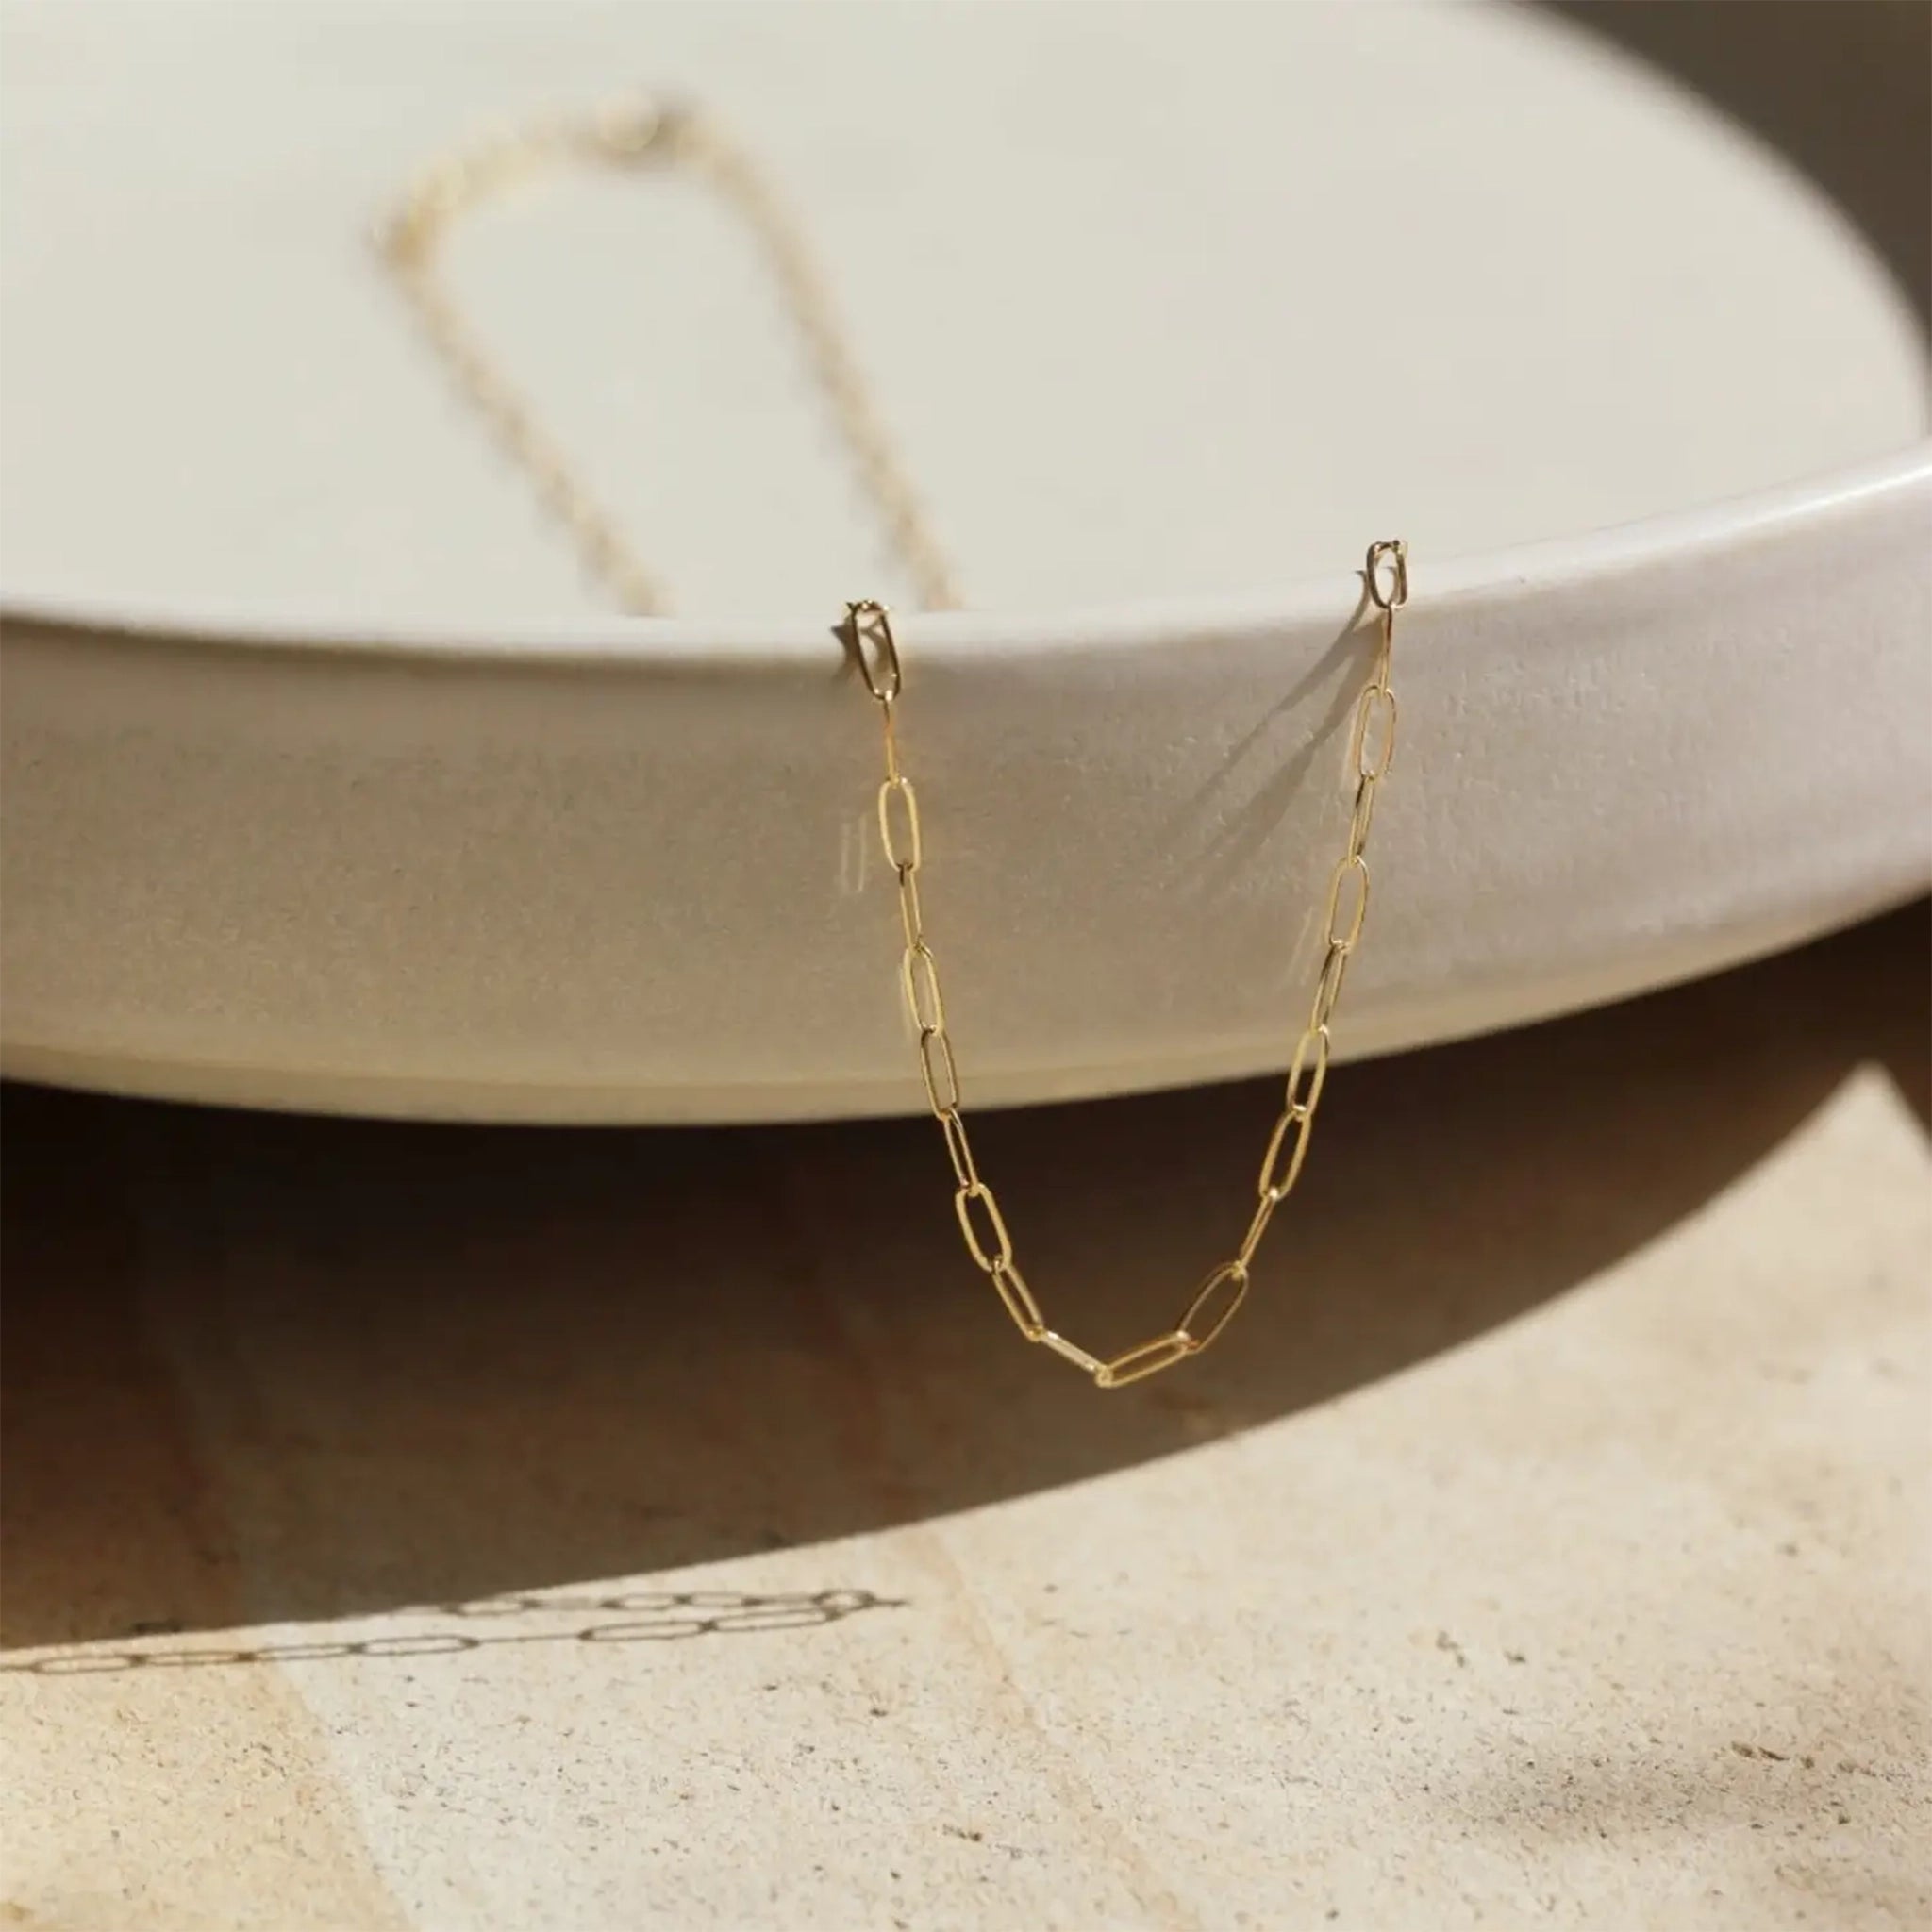 A dainty gold link chain necklace sitting in a ceramic dish. 